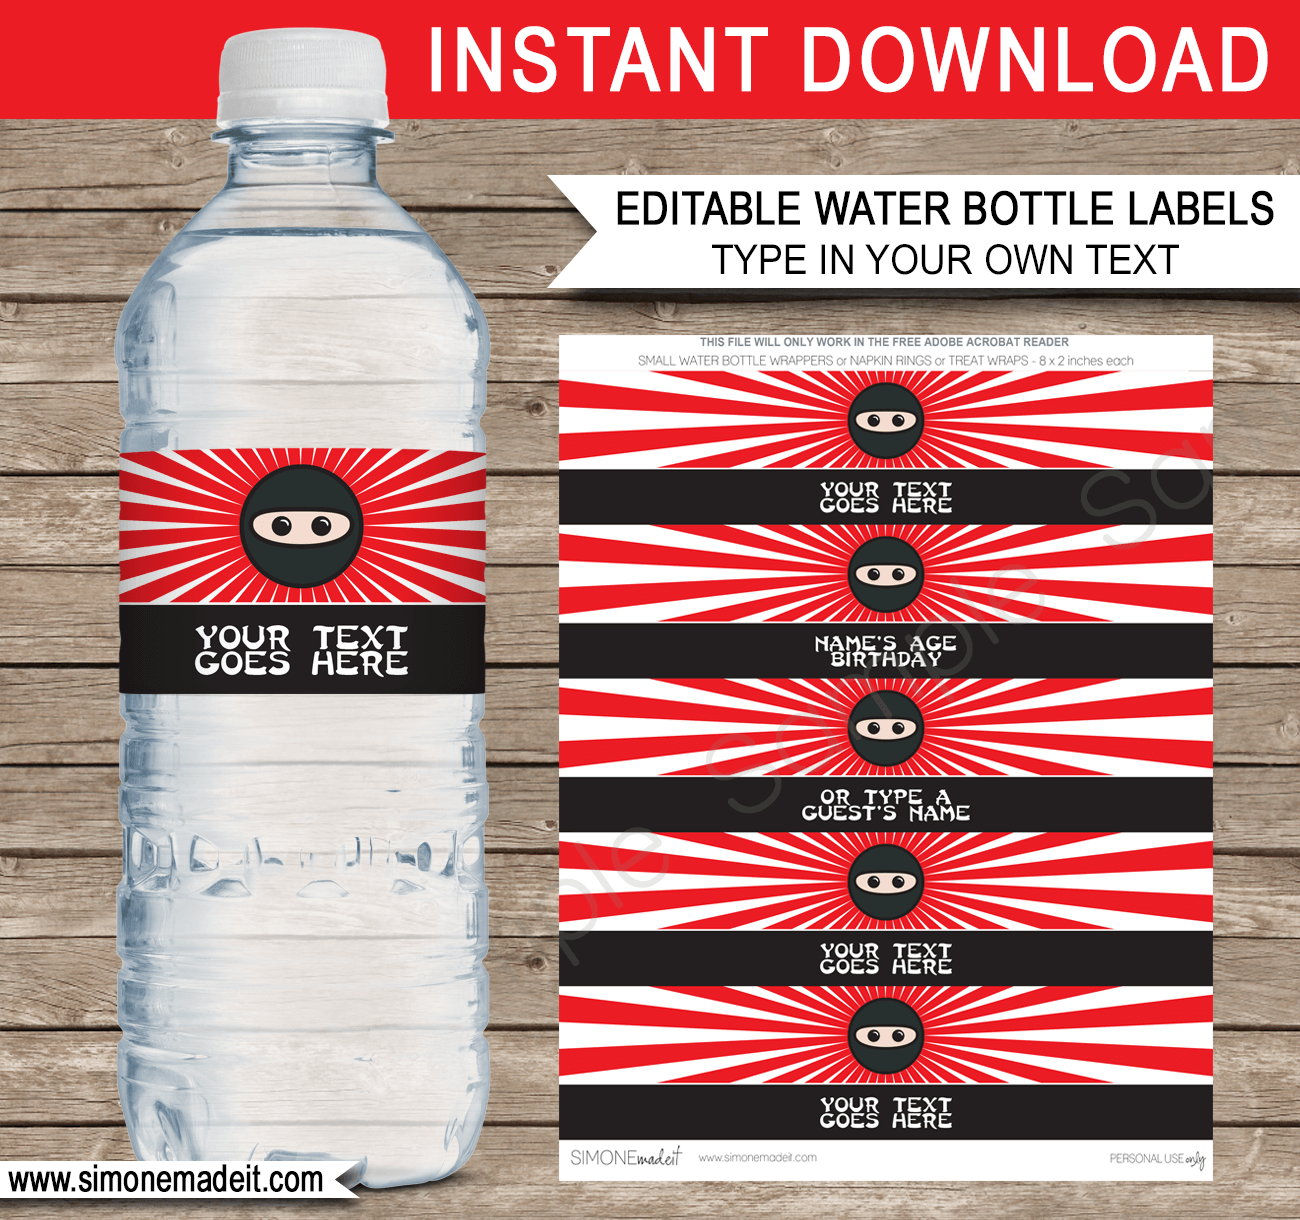 Template For Water Bottle Labels from www.simonemadeit.com